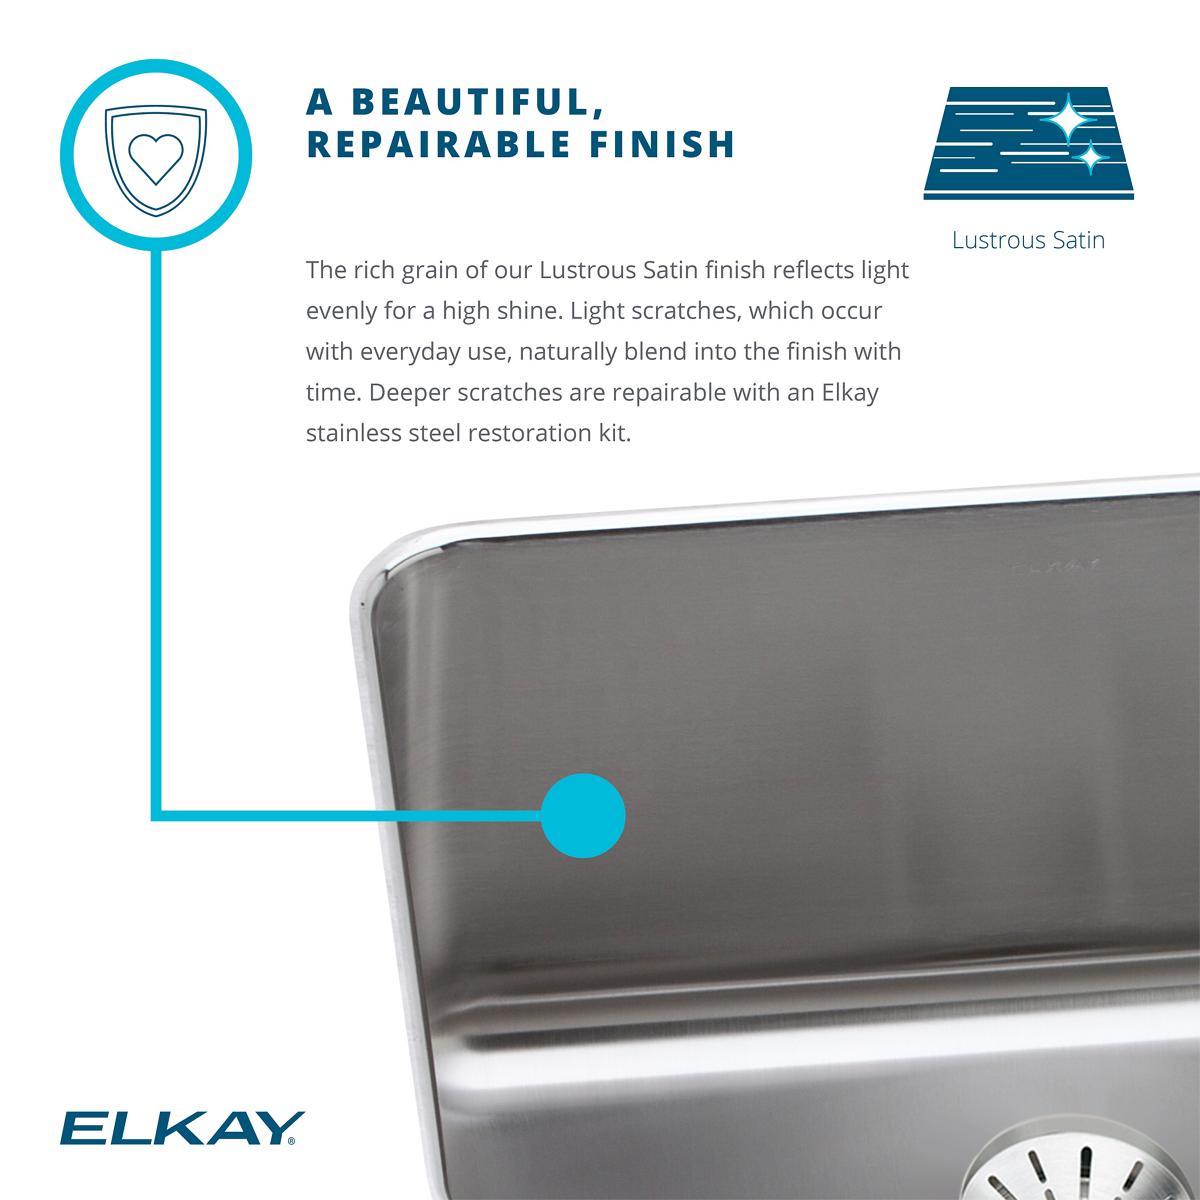 Elkay Lustertone Classic Stainless Steel 15" x 15" x 7-1/8" Single Bowl Drop-in Bar Sink and Faucet Kit